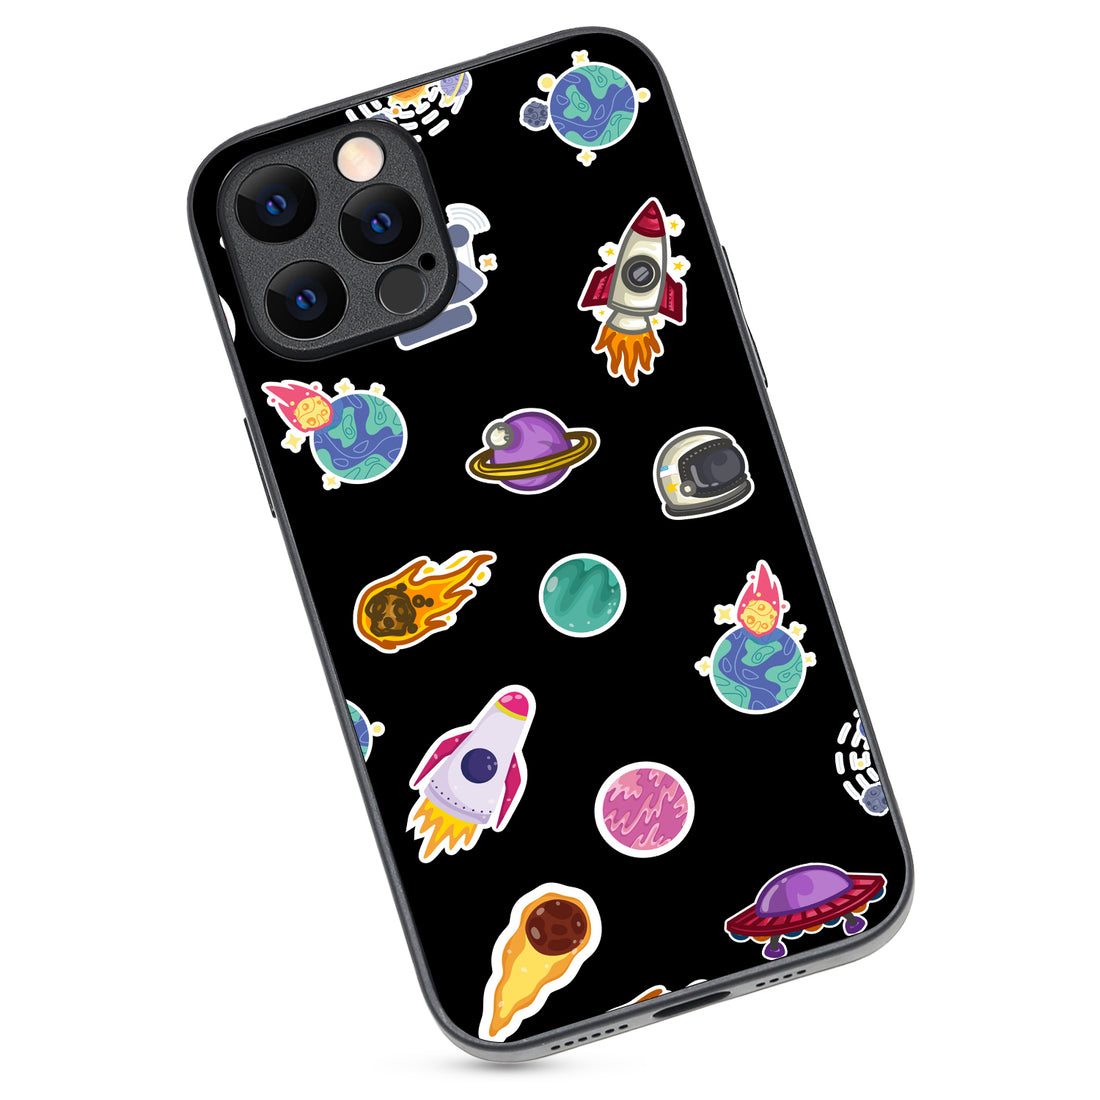 Stickers Space iPhone 12 Pro Max Case